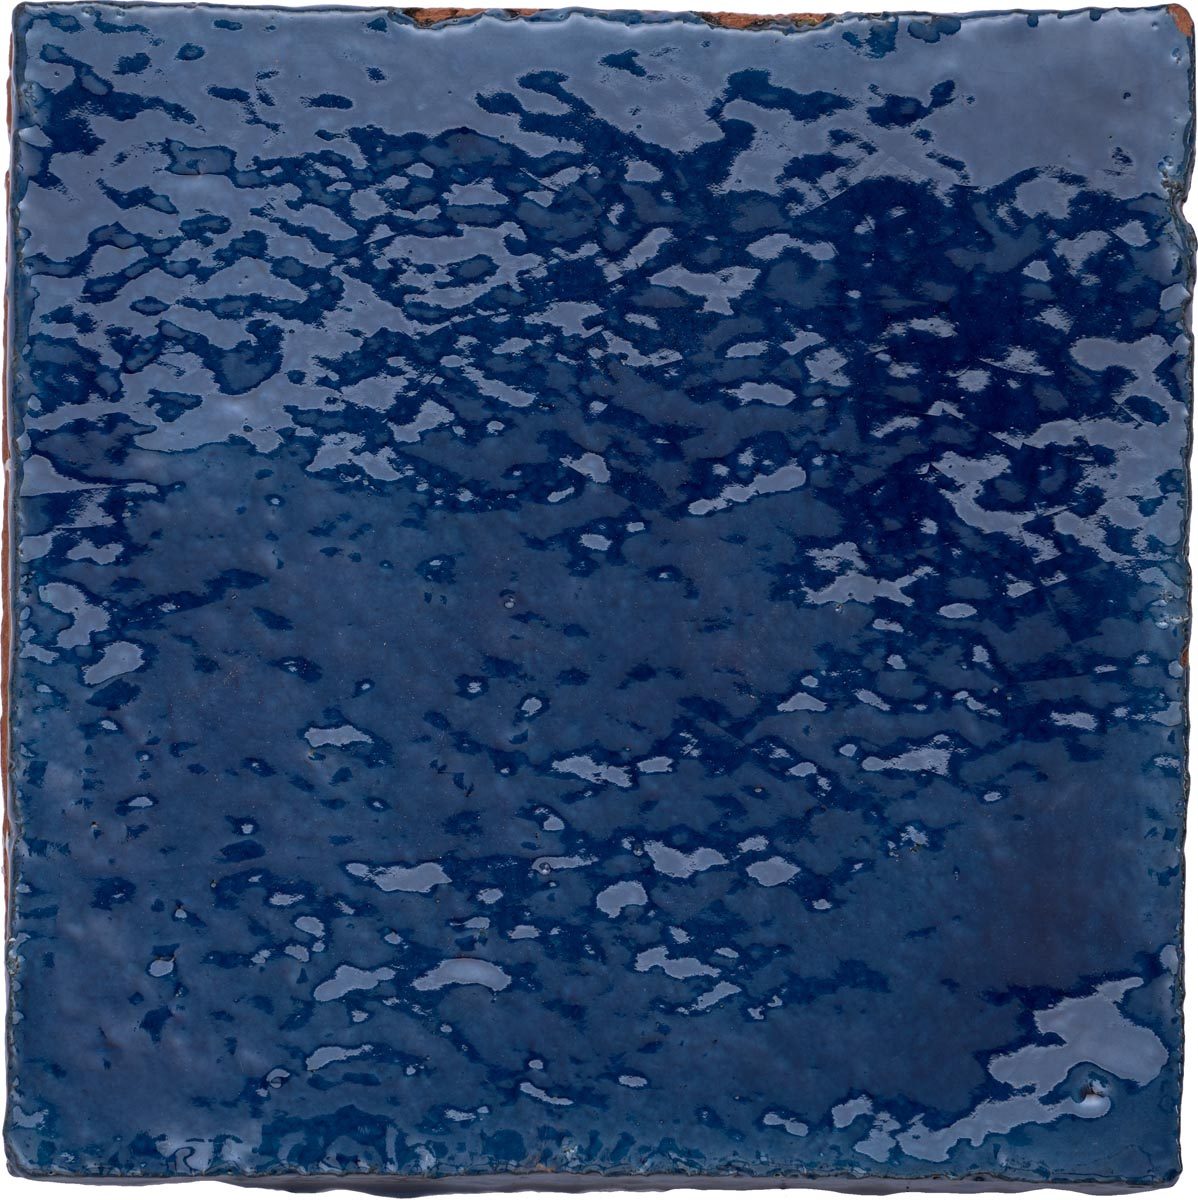 Cerulean Square, product variant image